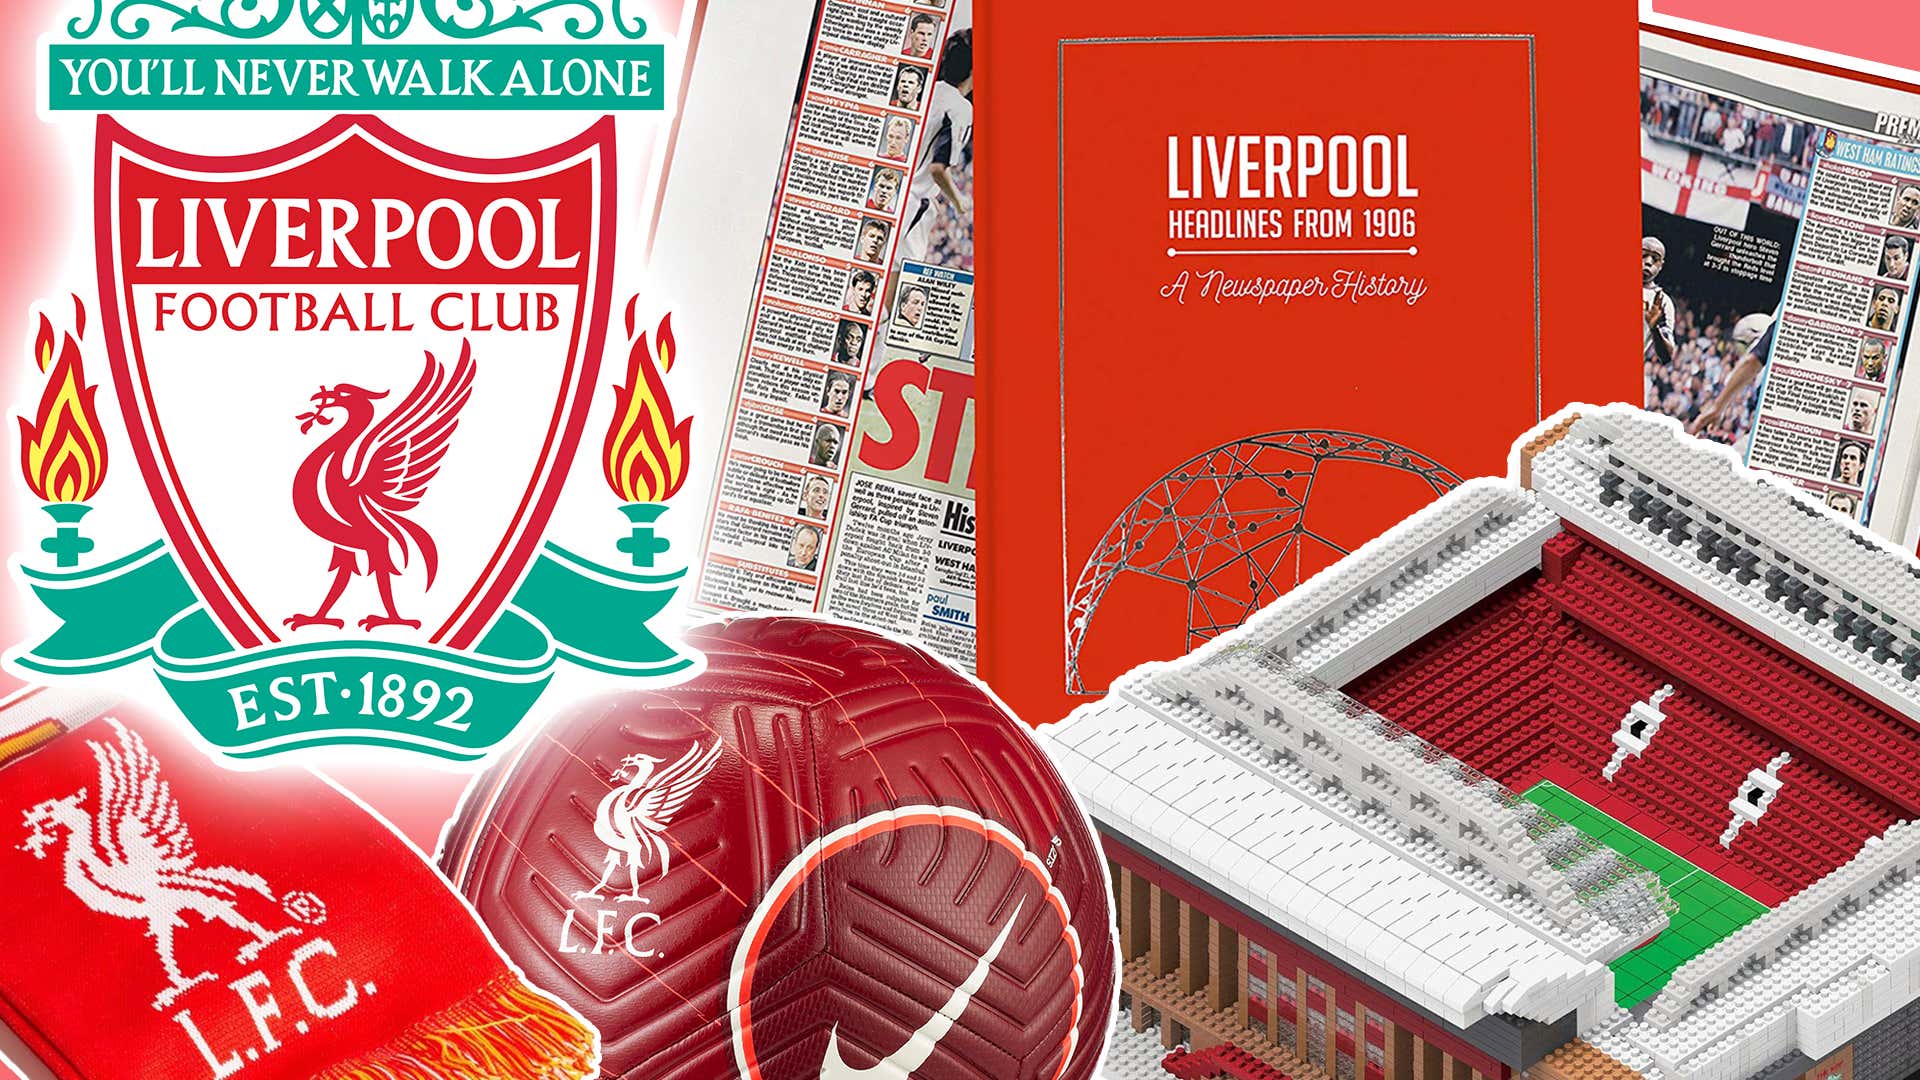 27 of the best gifts Liverpool fans can get in 2021